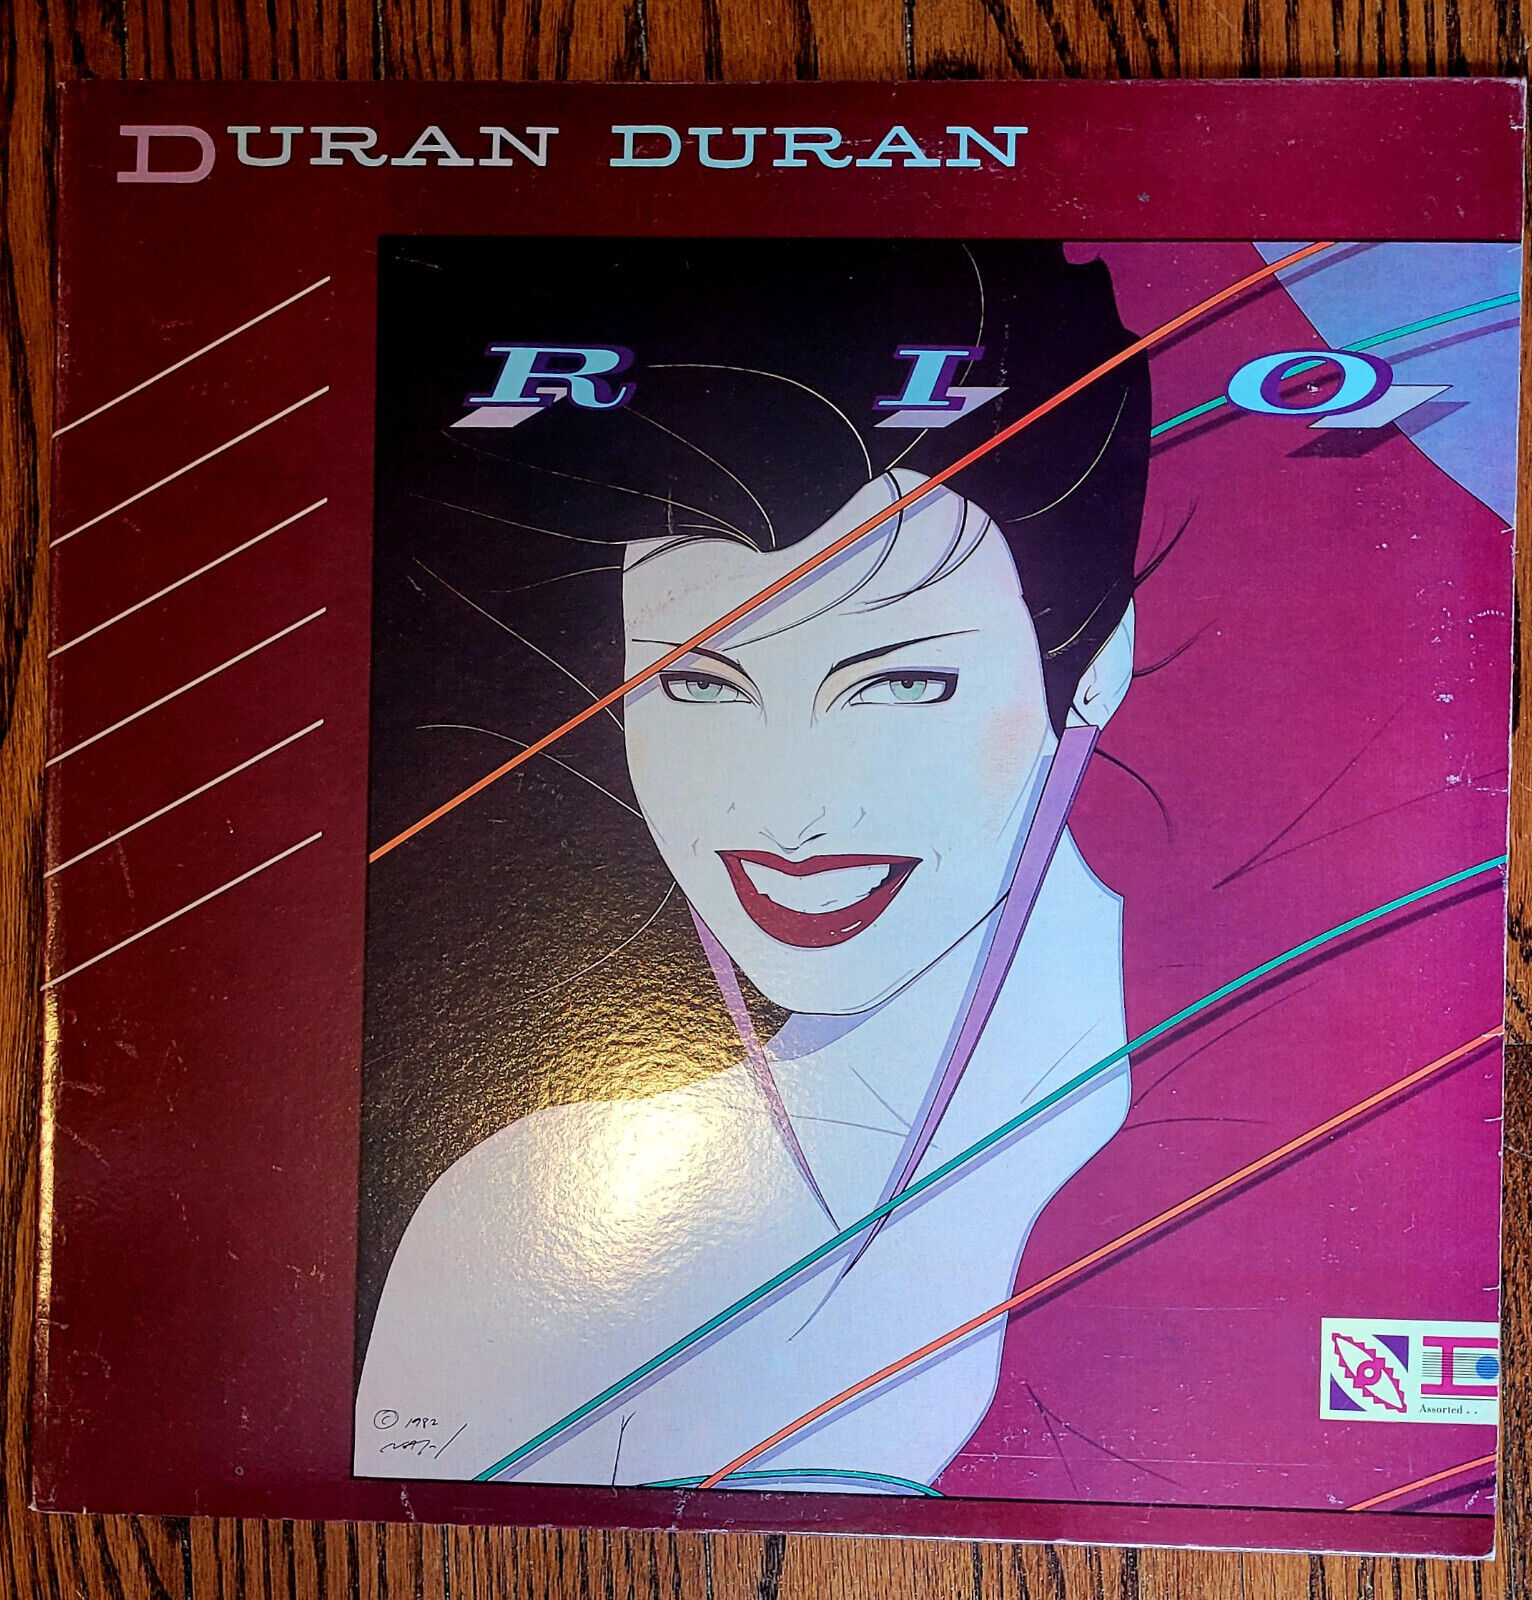 Duran Duran - Rio LP 1982 VINTAGE VINYL Hungry like the Wolf, Capitol ST-12211